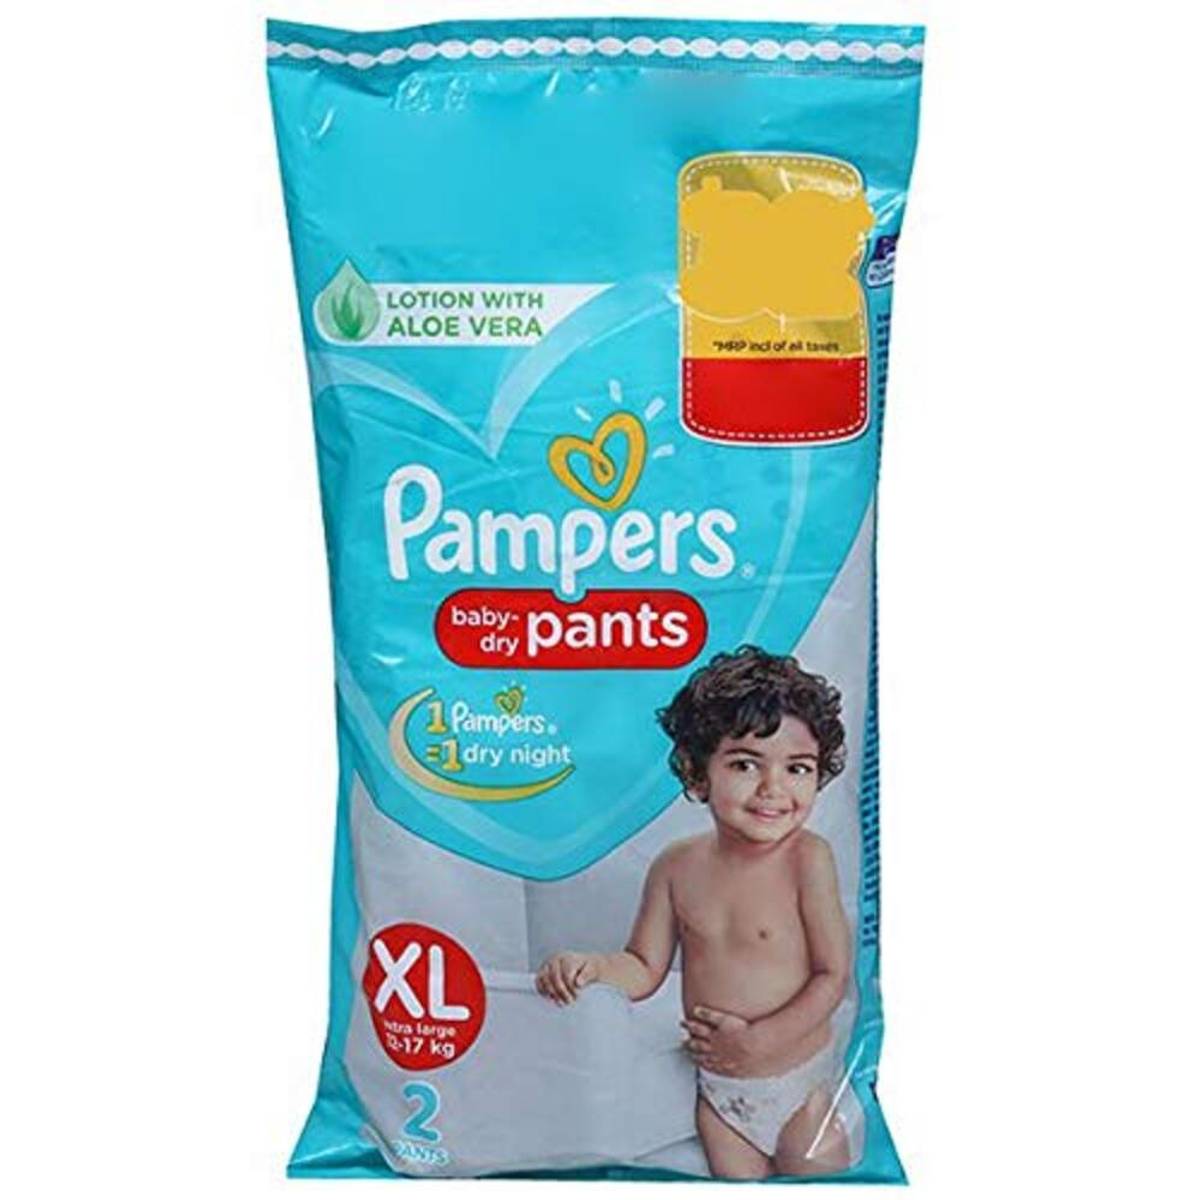 Pampers New Diapers Pants, Medium (54 Count) & Pampers New Diapers Pants, XL  (56 Count) : Amazon.in: Baby Products